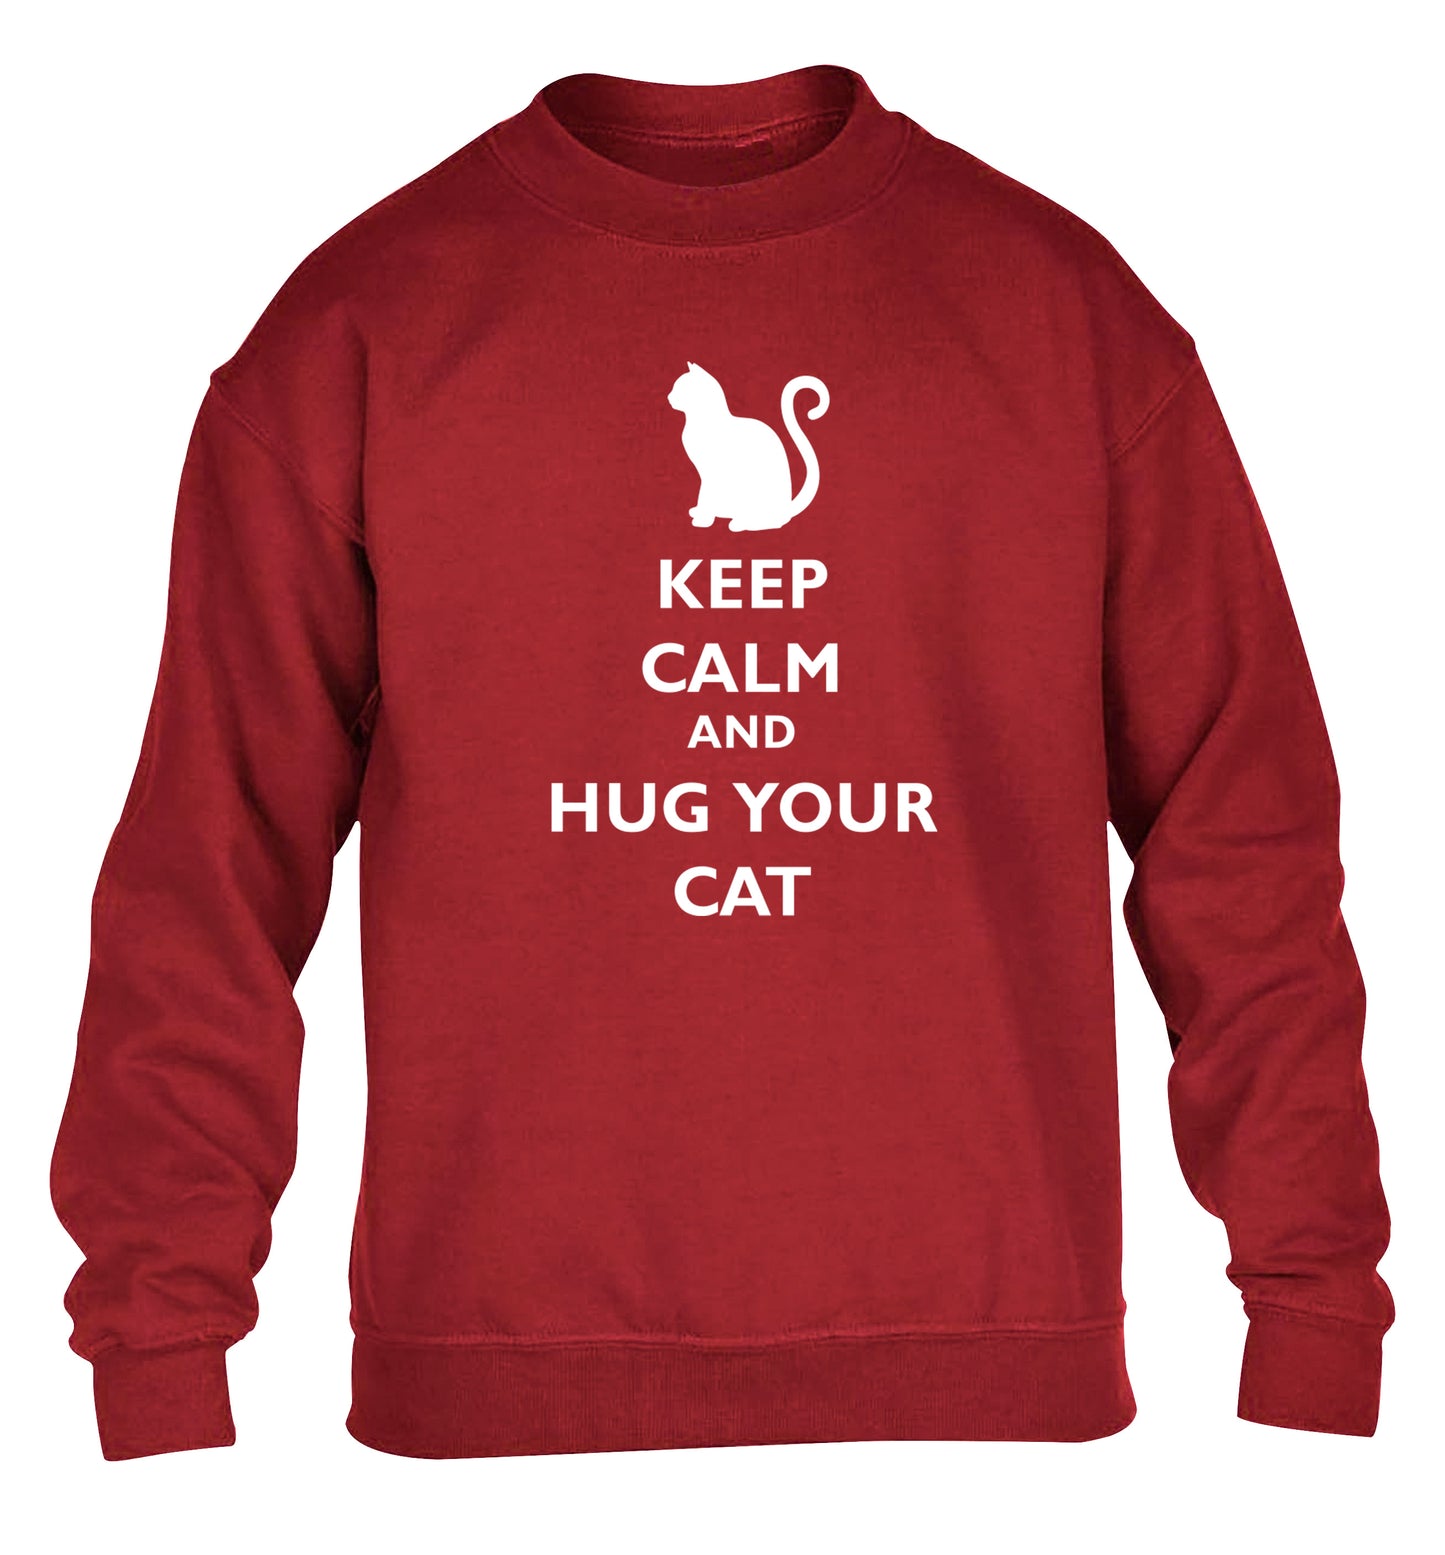 Keep calm and hug your cat children's grey sweater 12-13 Years